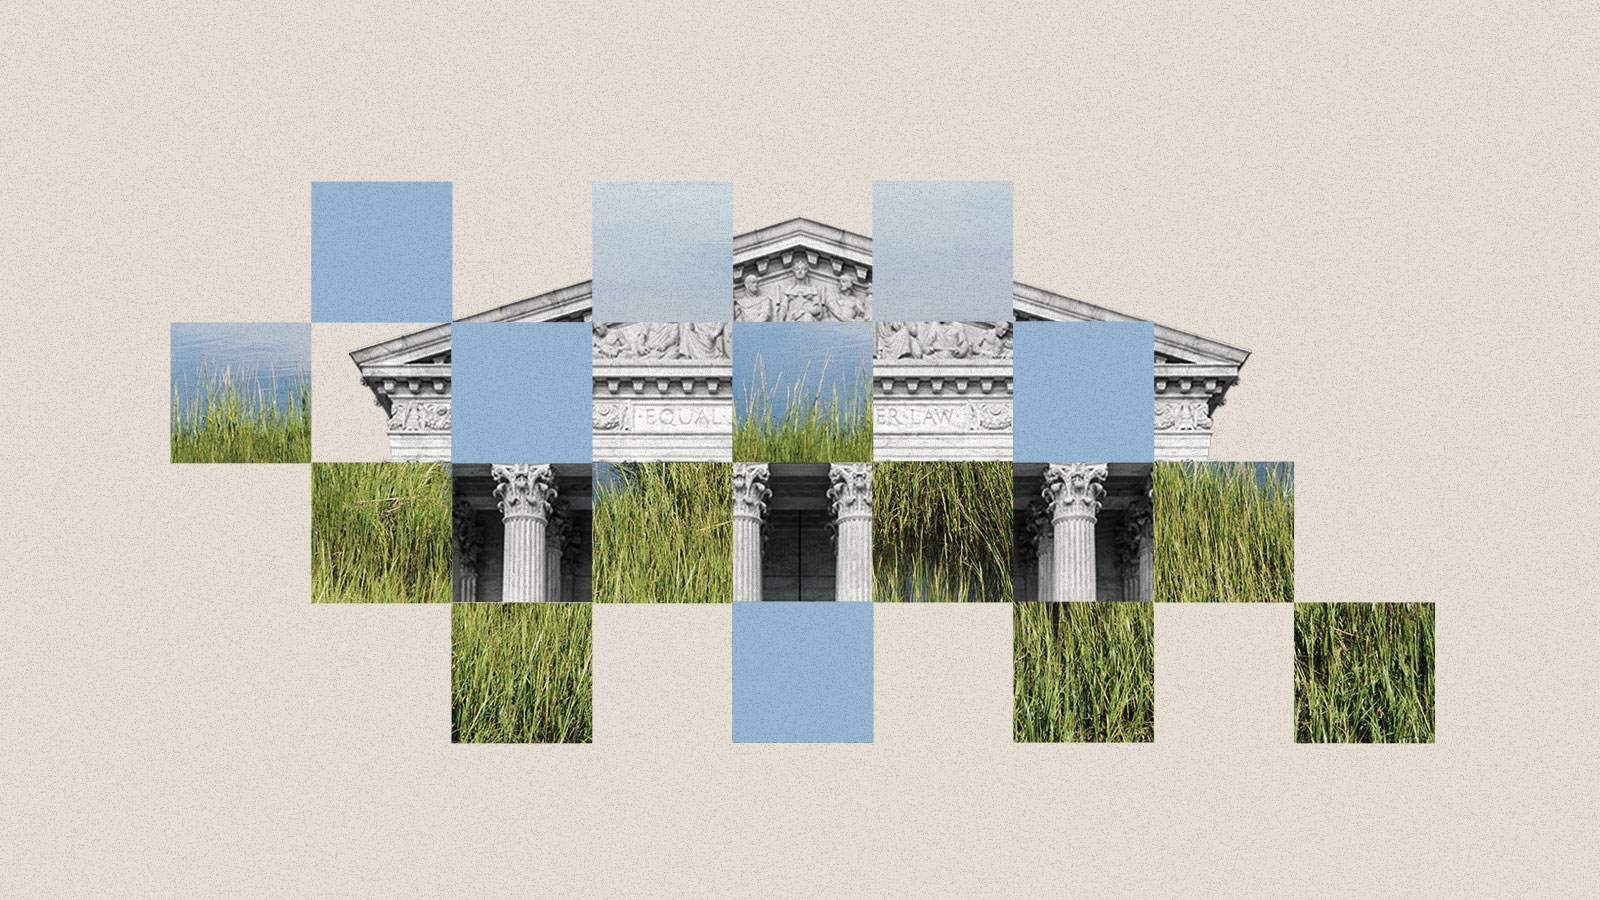 Collage of Supreme Court and wetland imagery interwoven in a checkerboard pattern